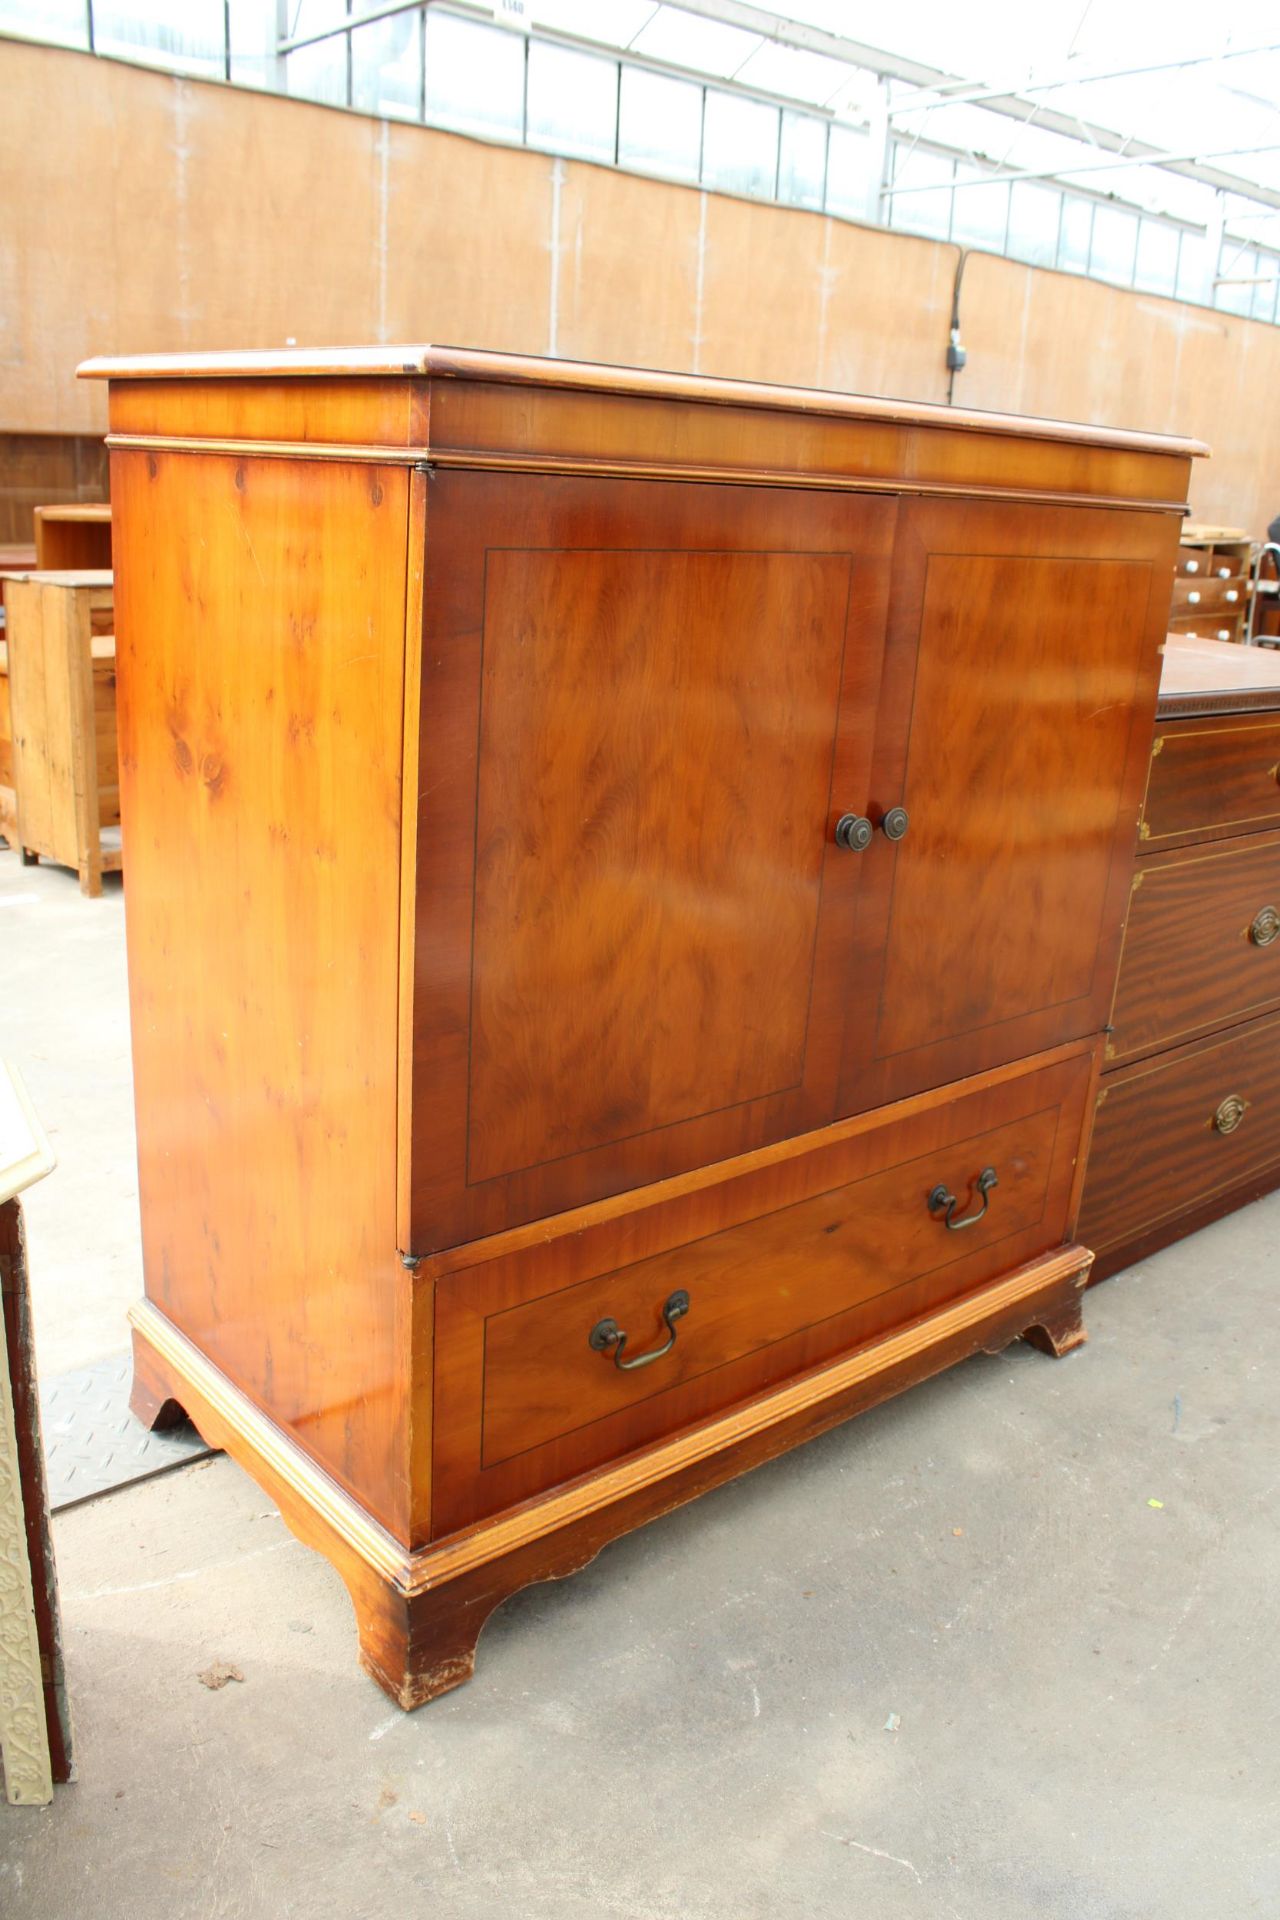 A YEW WOOD TELEVISION CABINET, 35" WIDE - Image 2 of 4